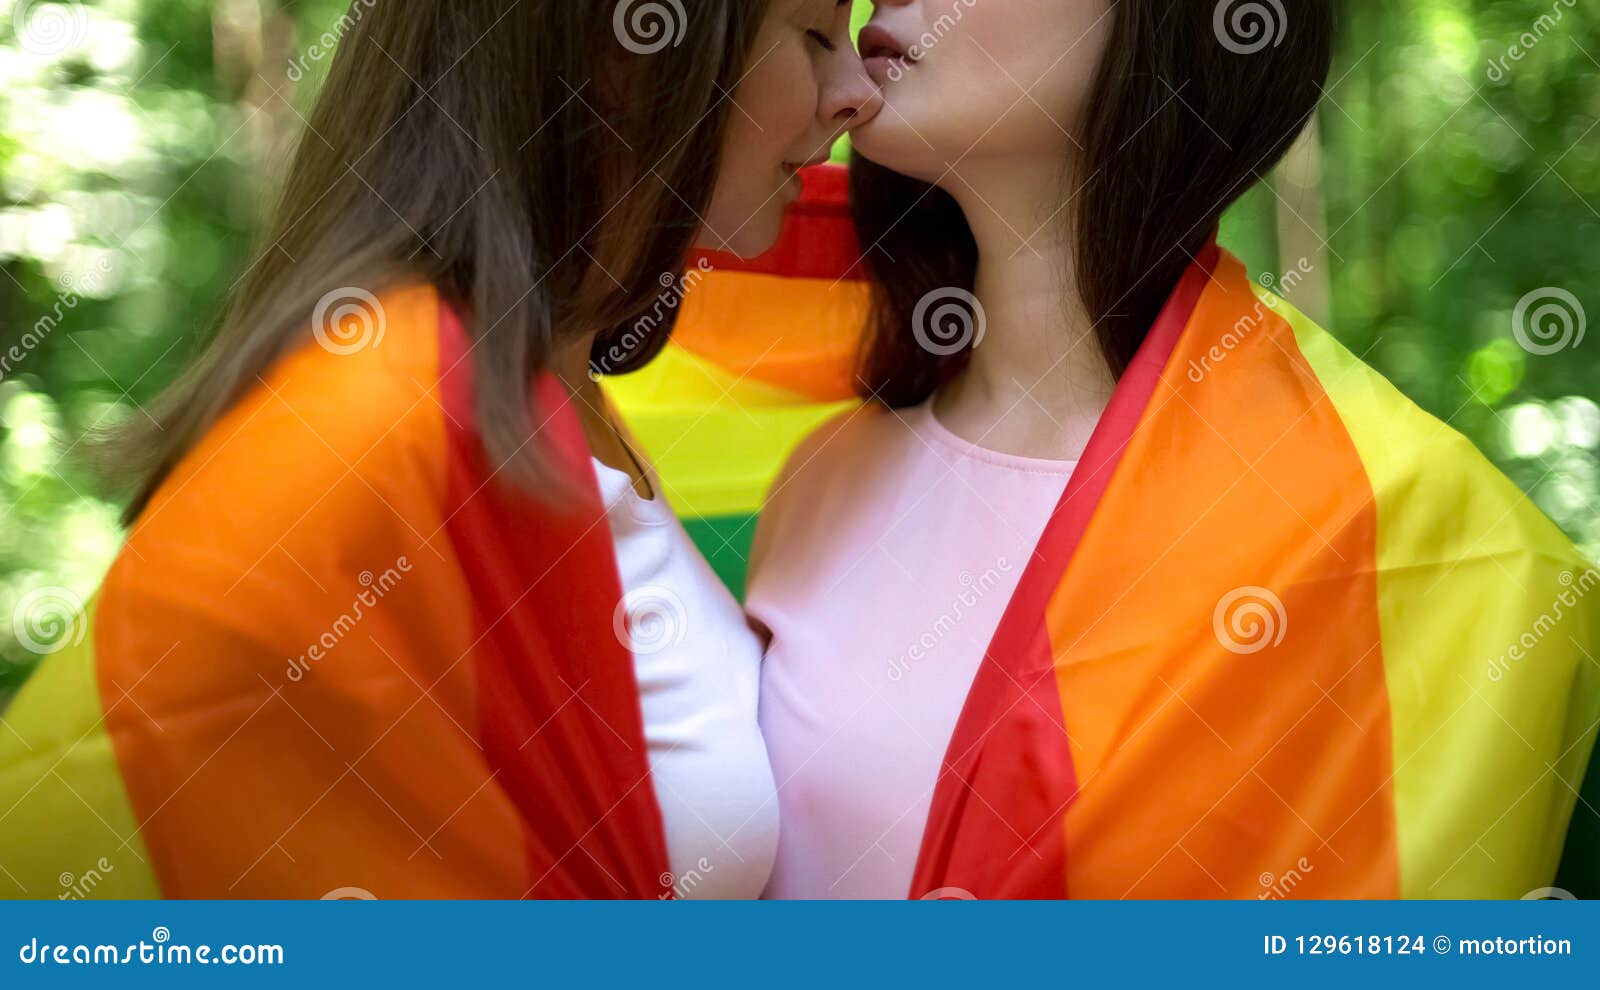 Two Lesbians Wrapped In Rainbow Flag Public Demonstration Of Love